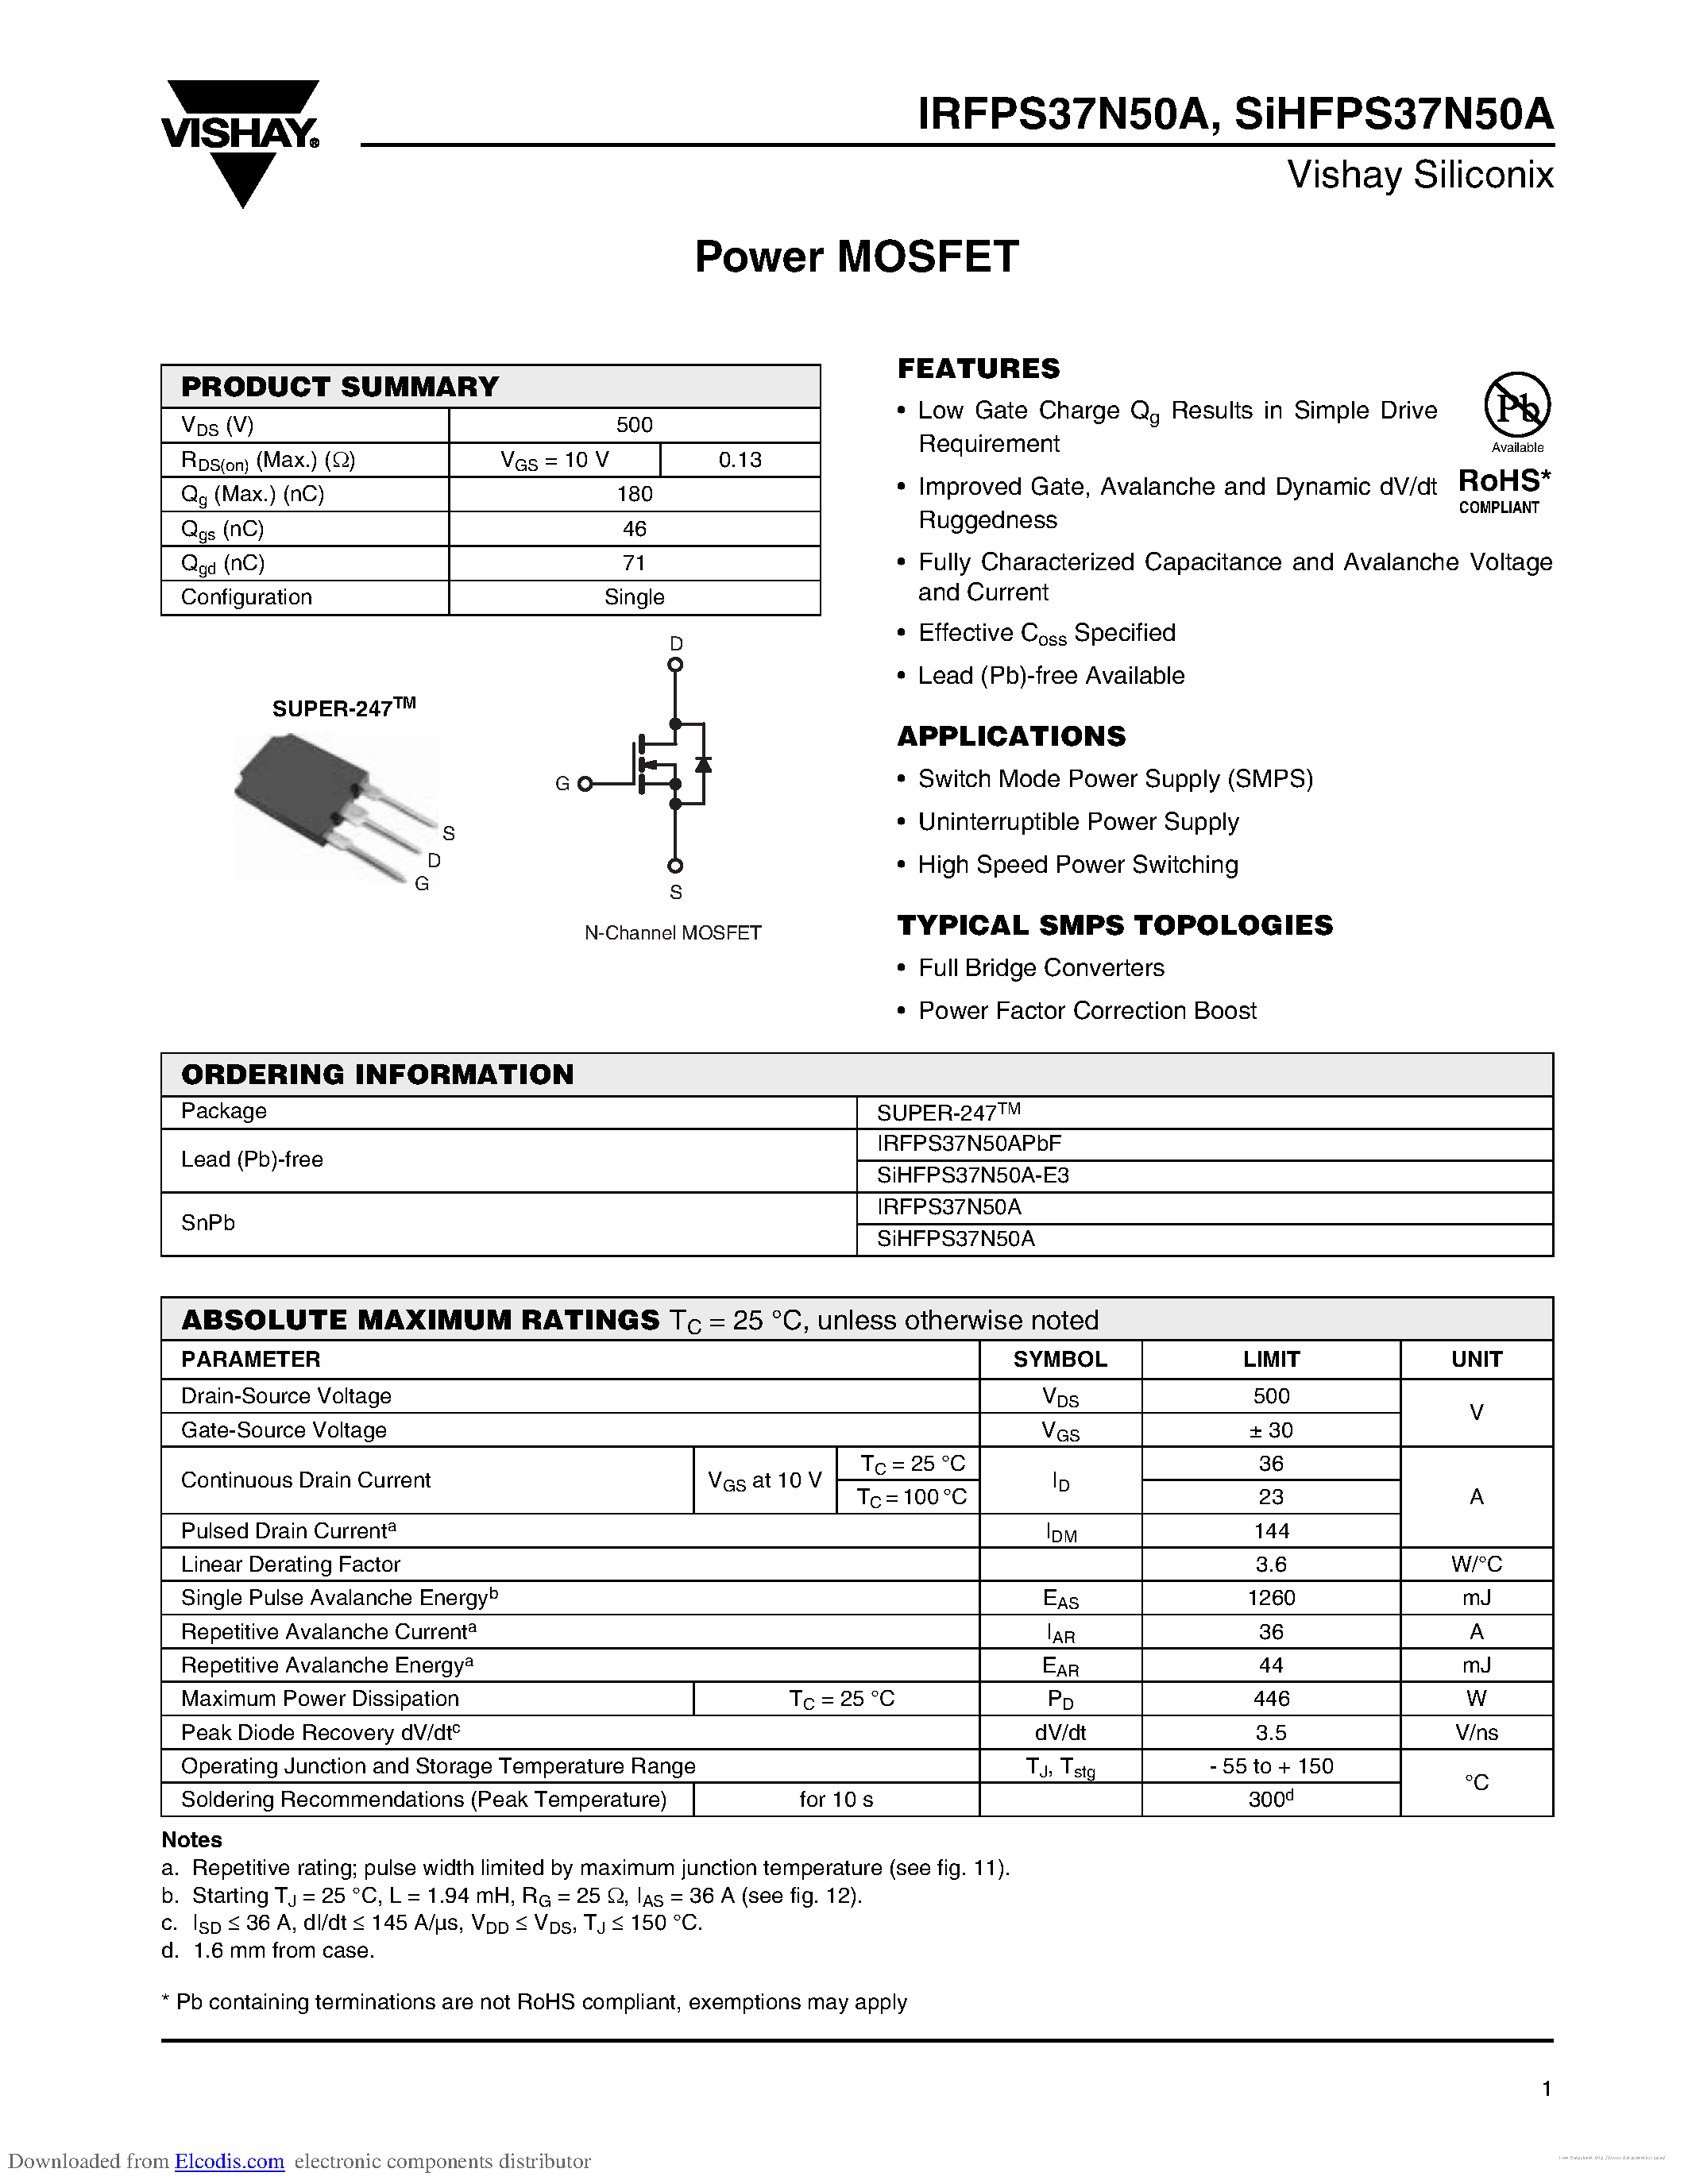 Datasheet IRFPS37N50A - page 1